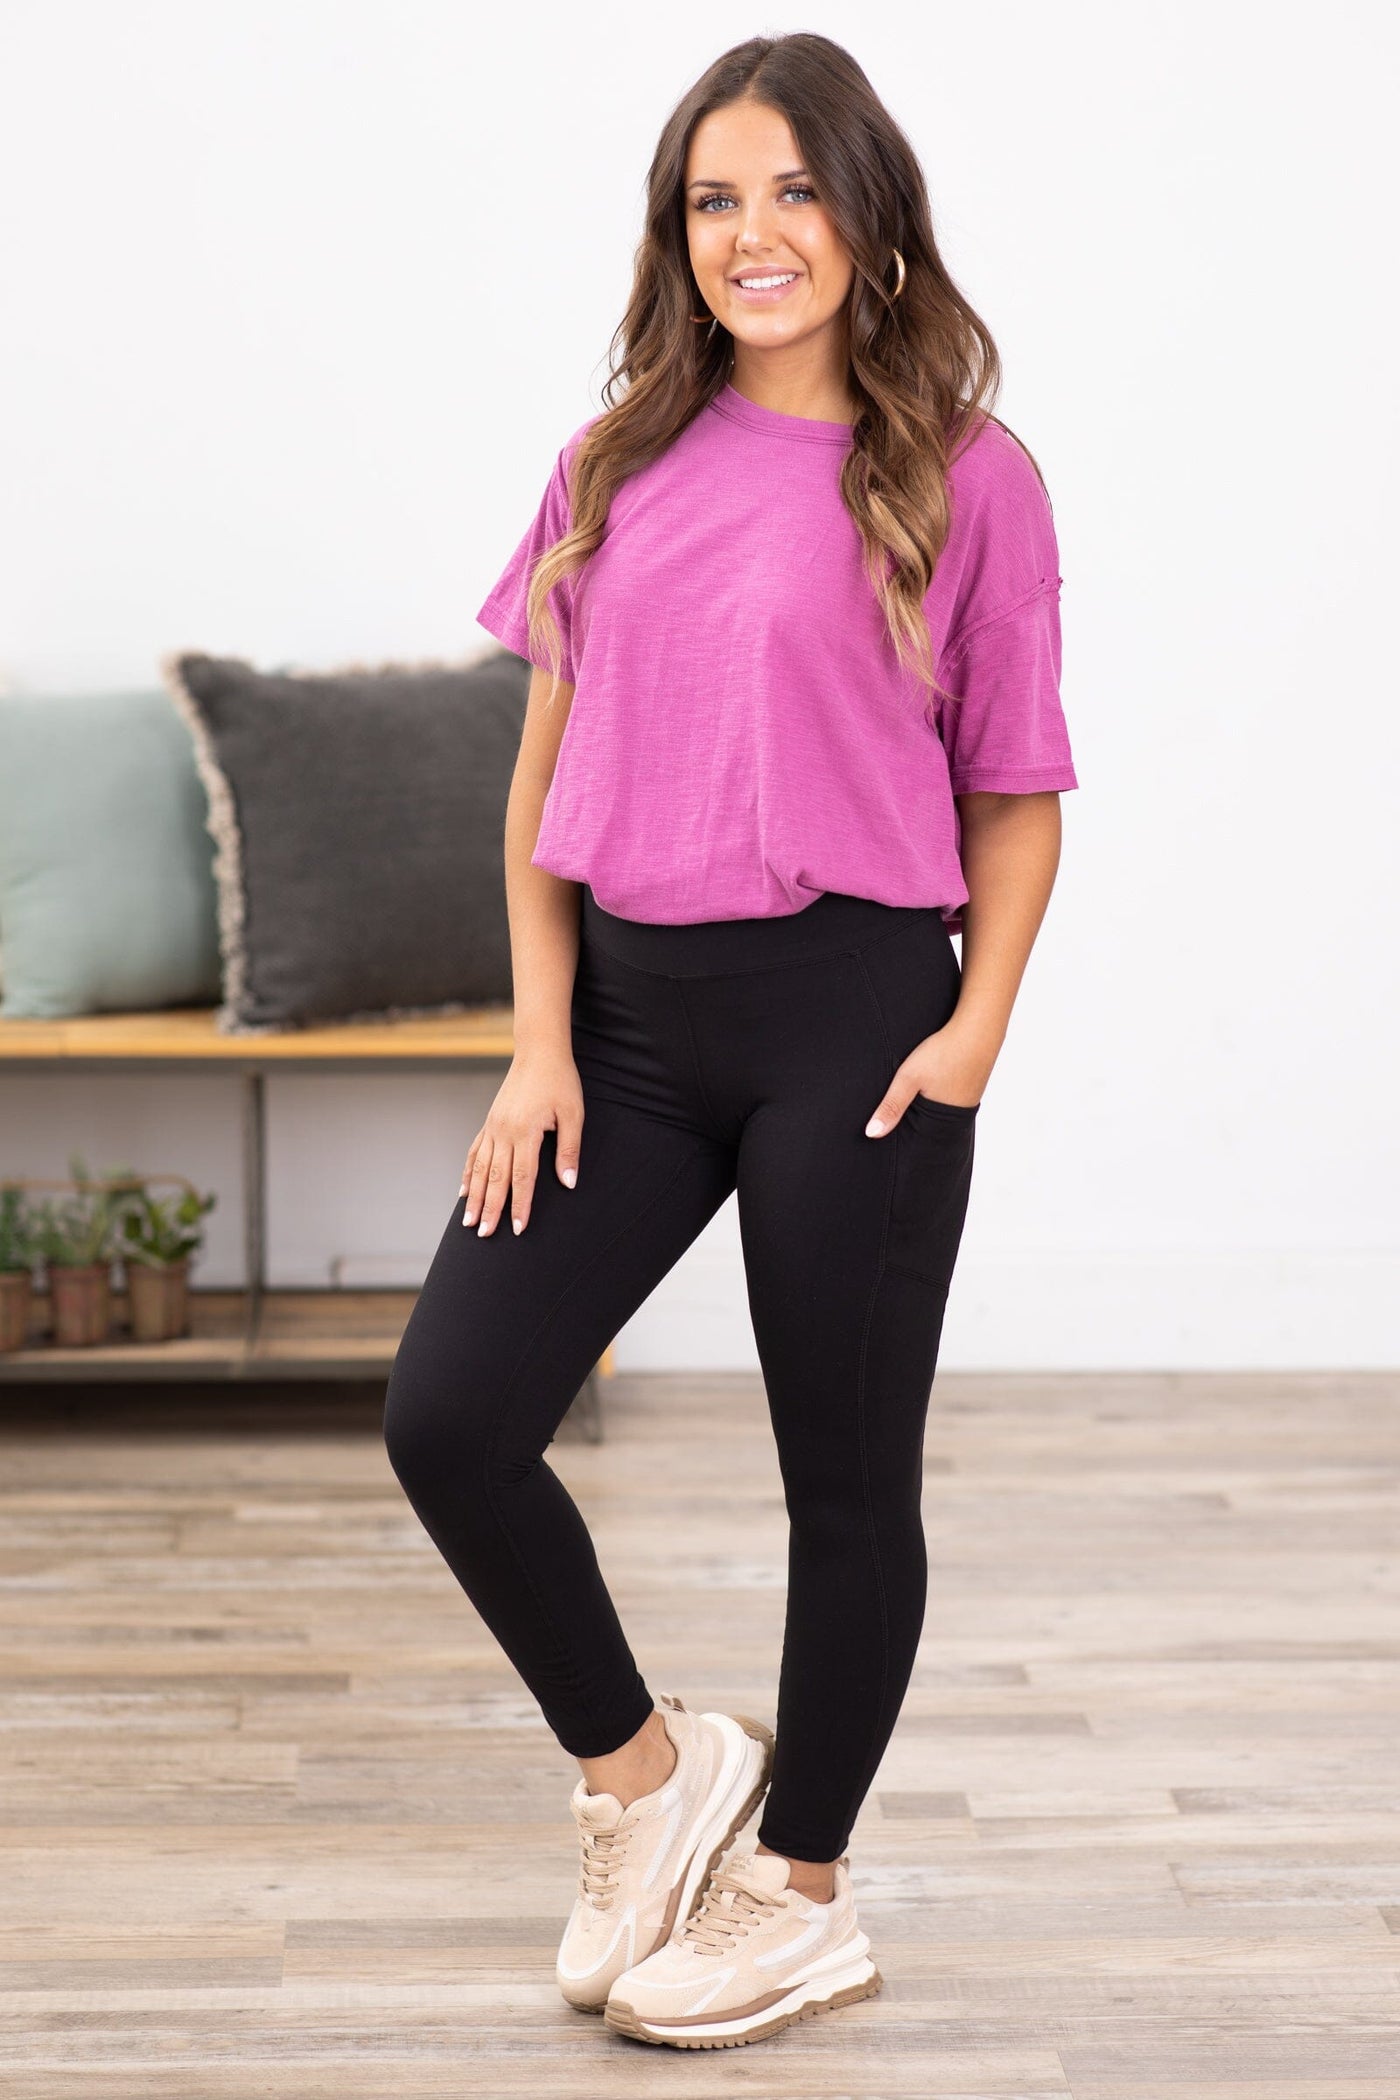 Black Buttery Soft Leggings With Side Pocket · Filly Flair